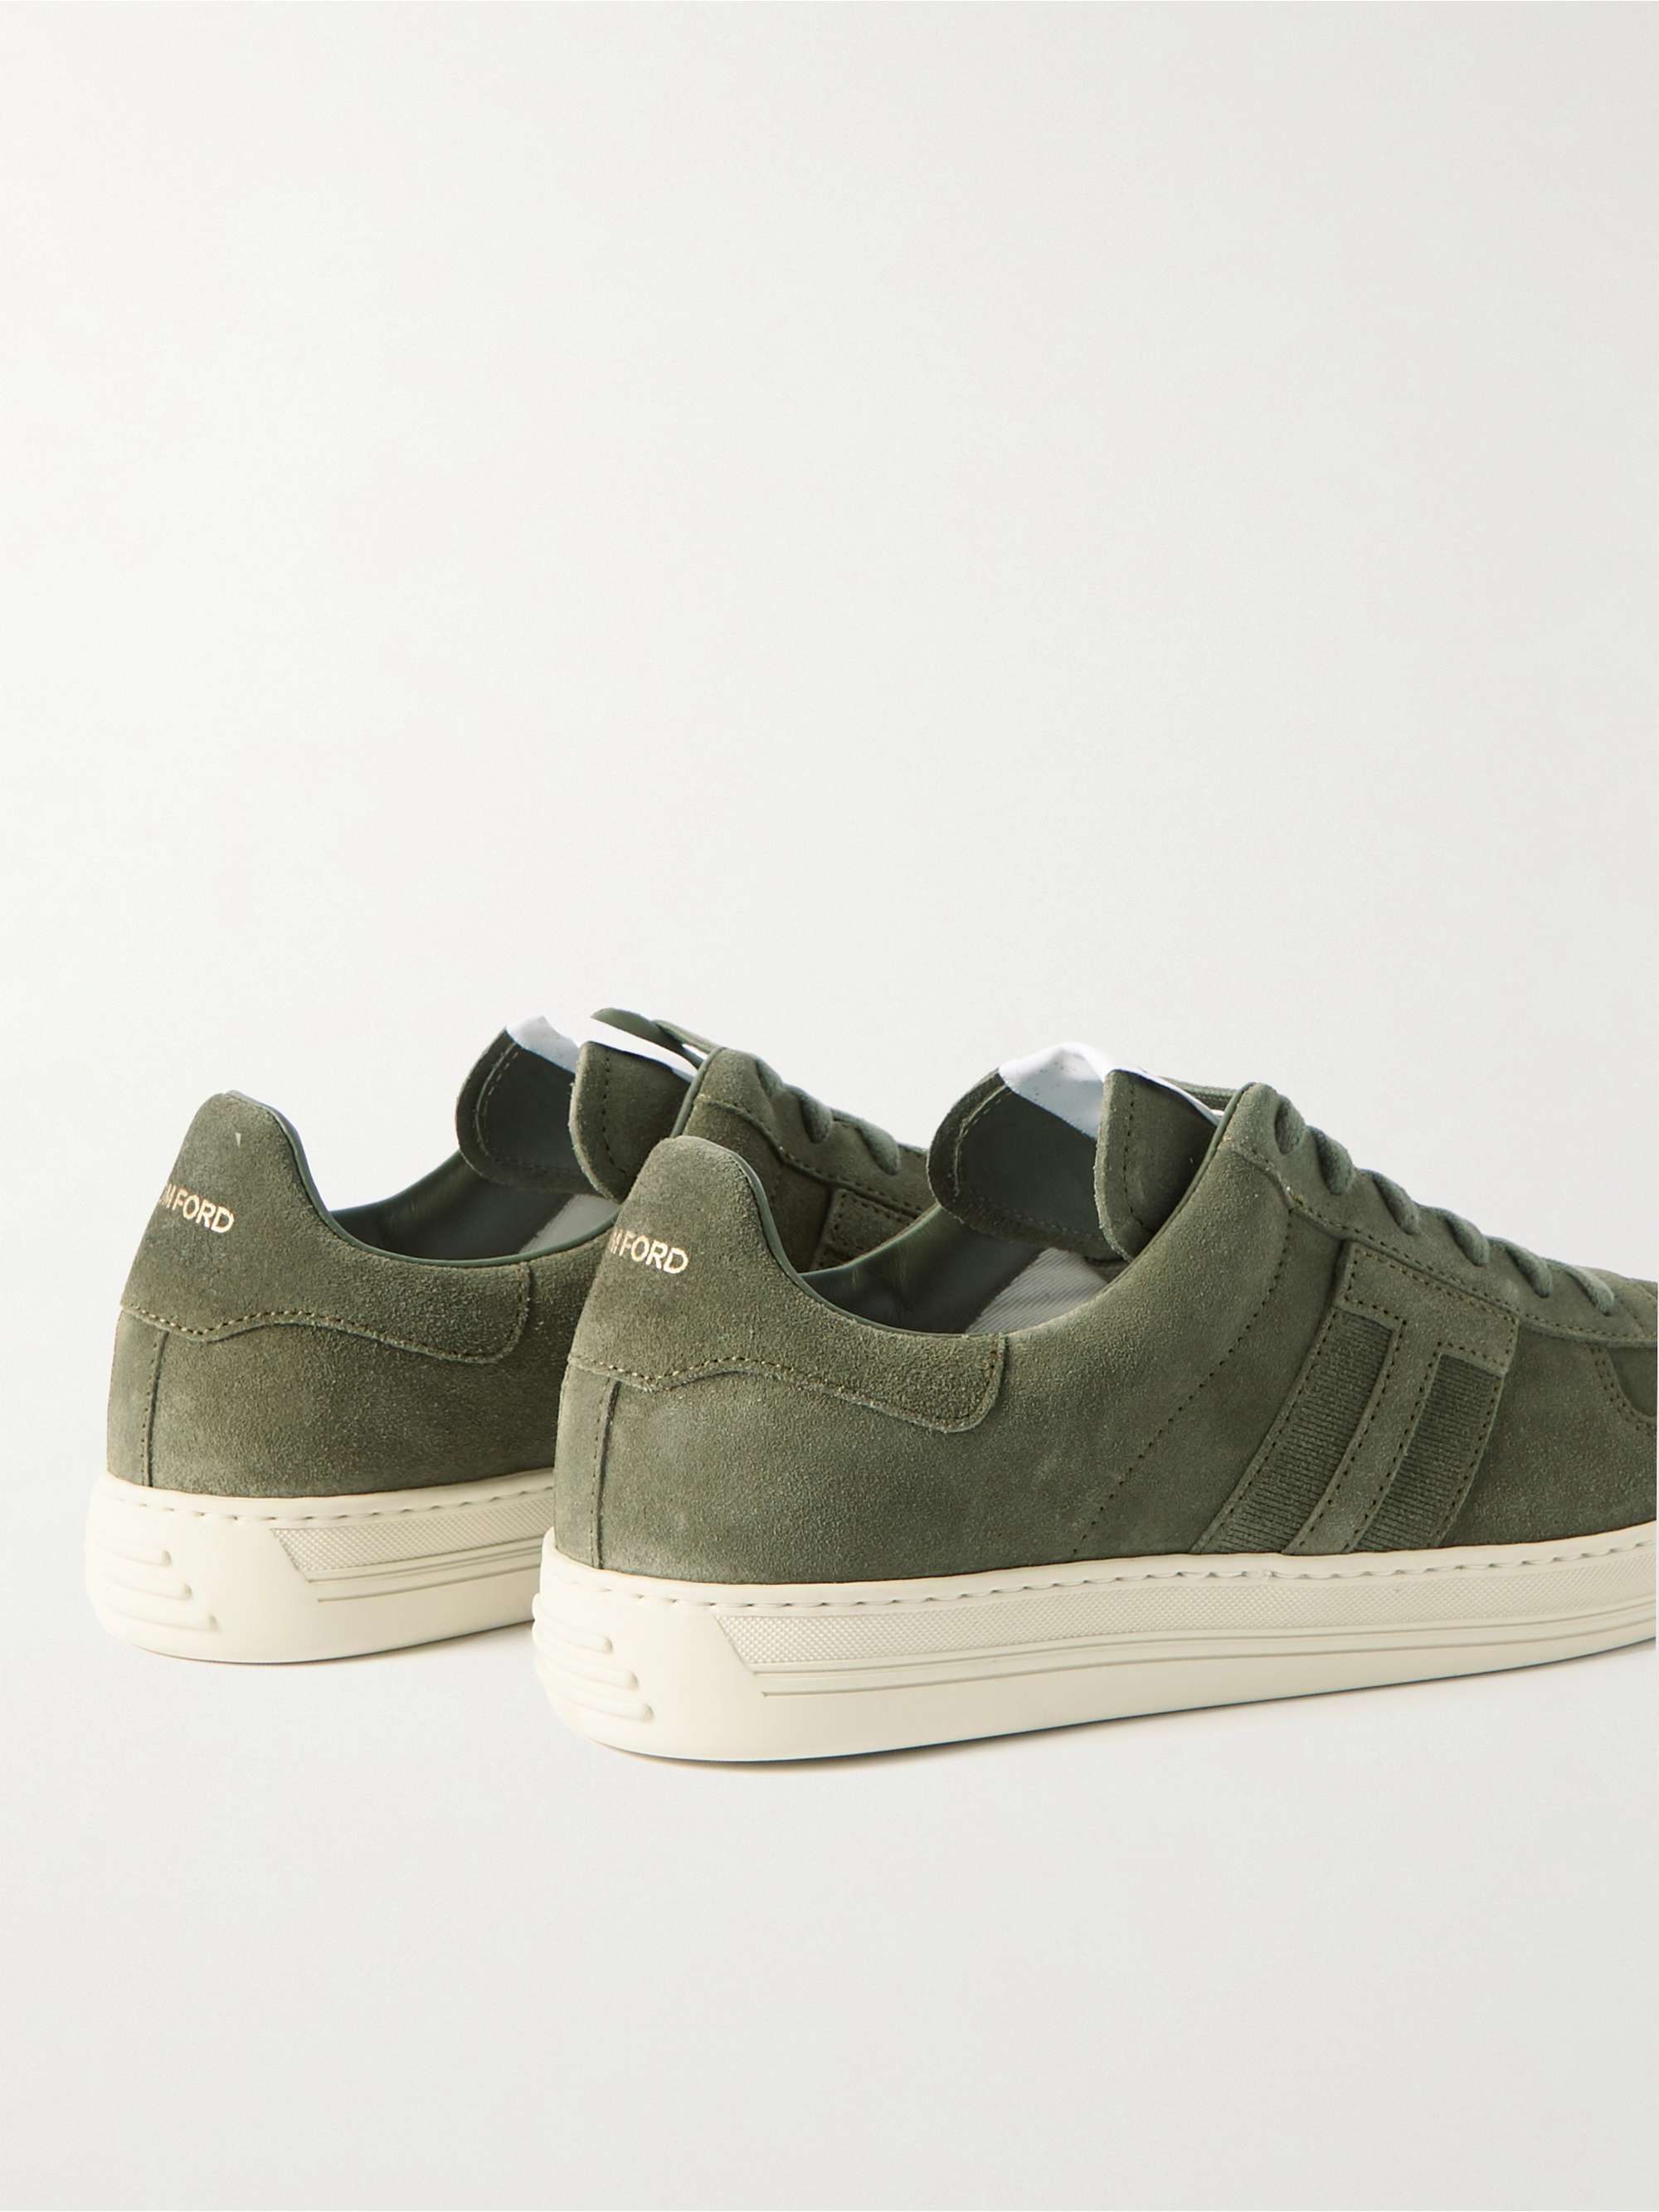 Radcliffe Suede Sneakers